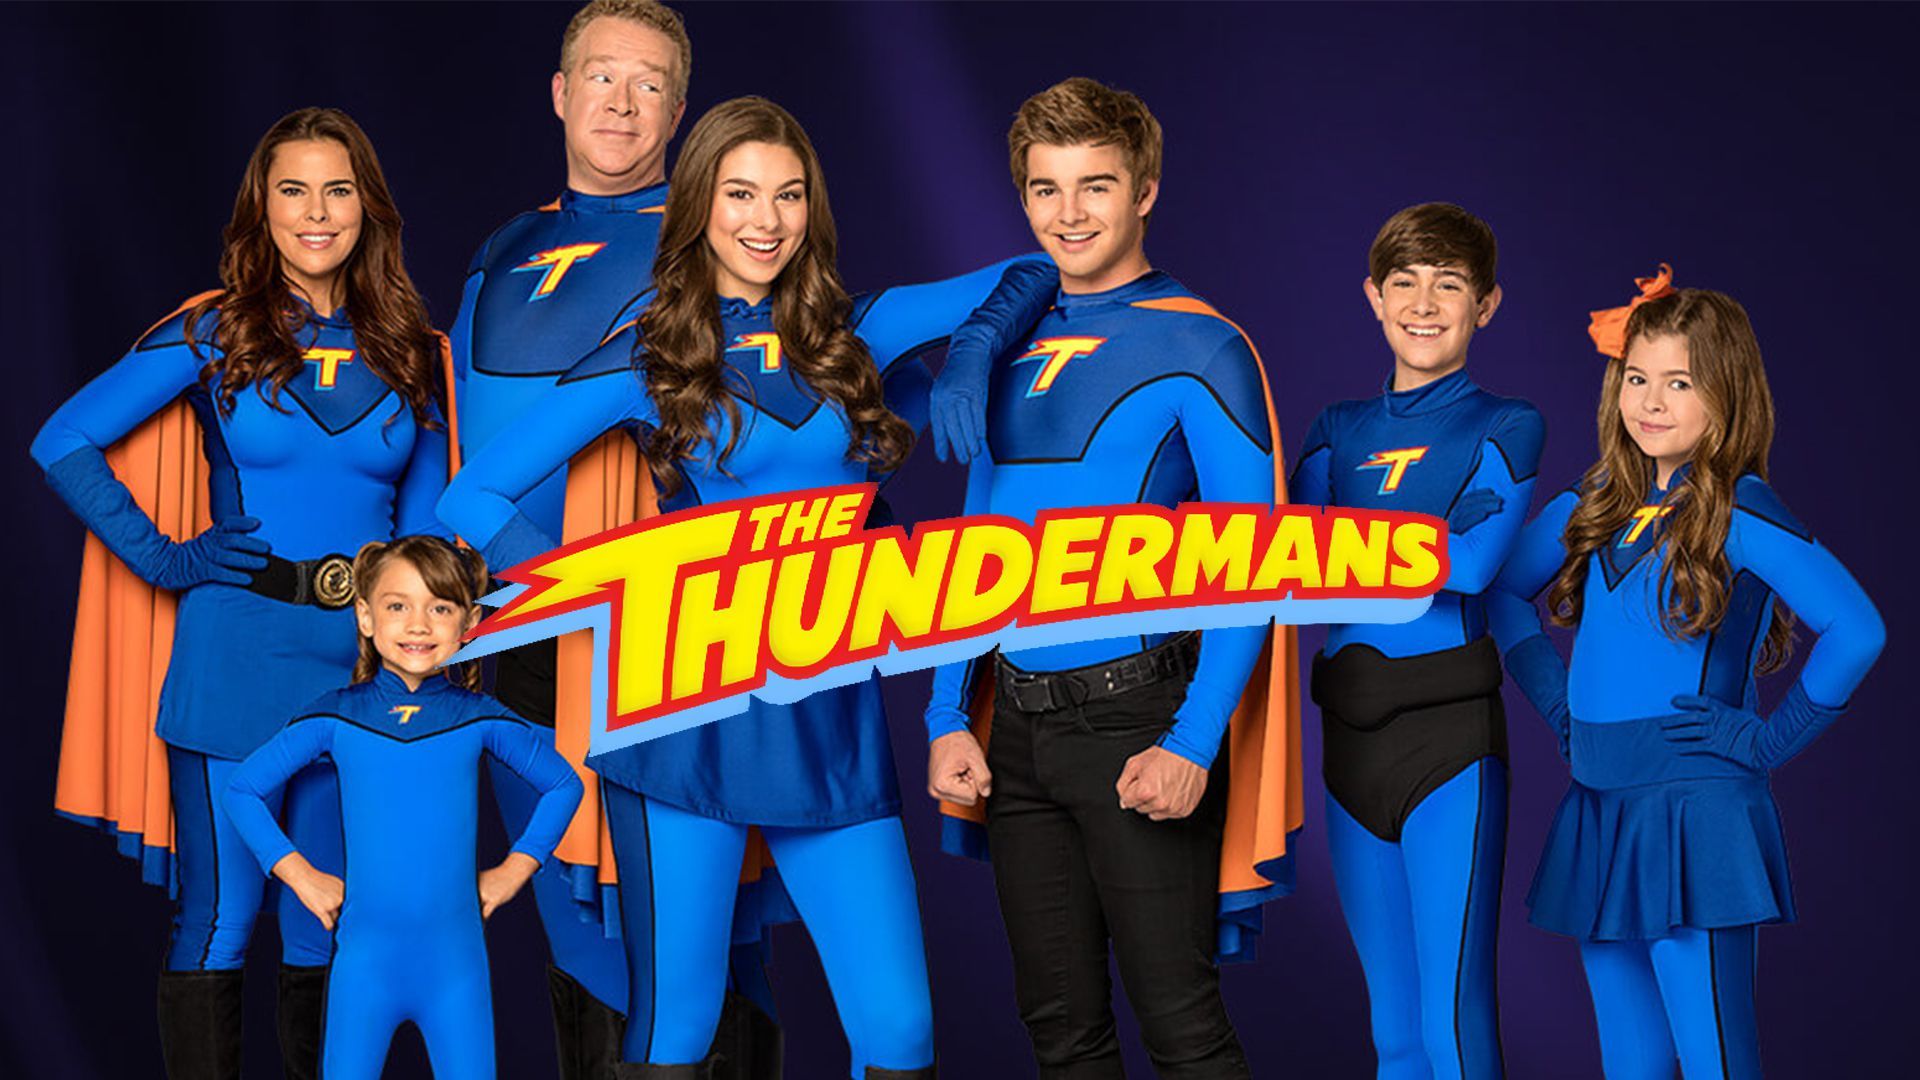 The Thundermans Wallpapers.